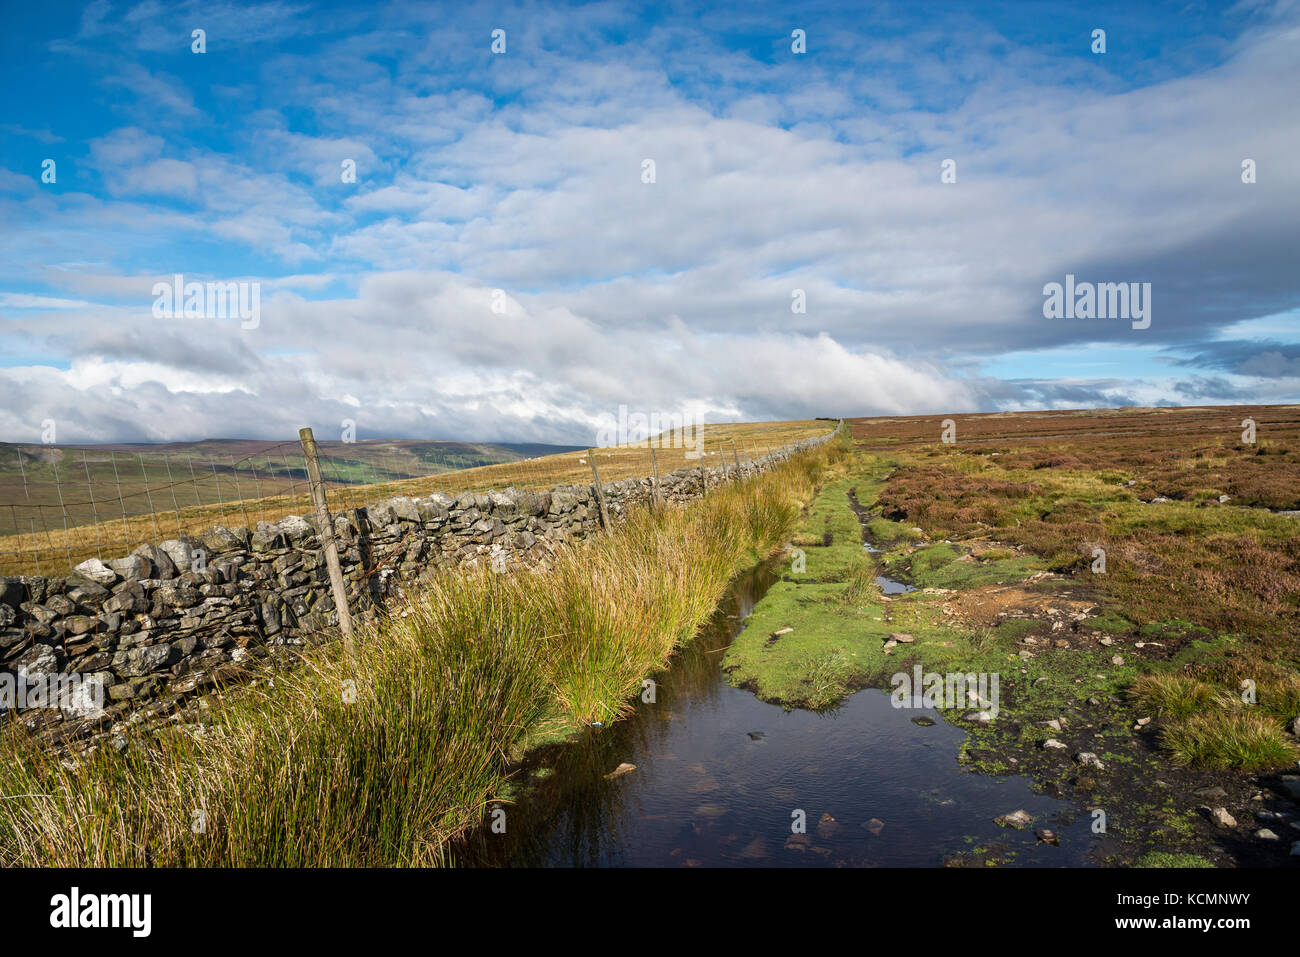 Wet footpath along Fremington edge near Reeth in the Yorkshire Dales, England. Stock Photo